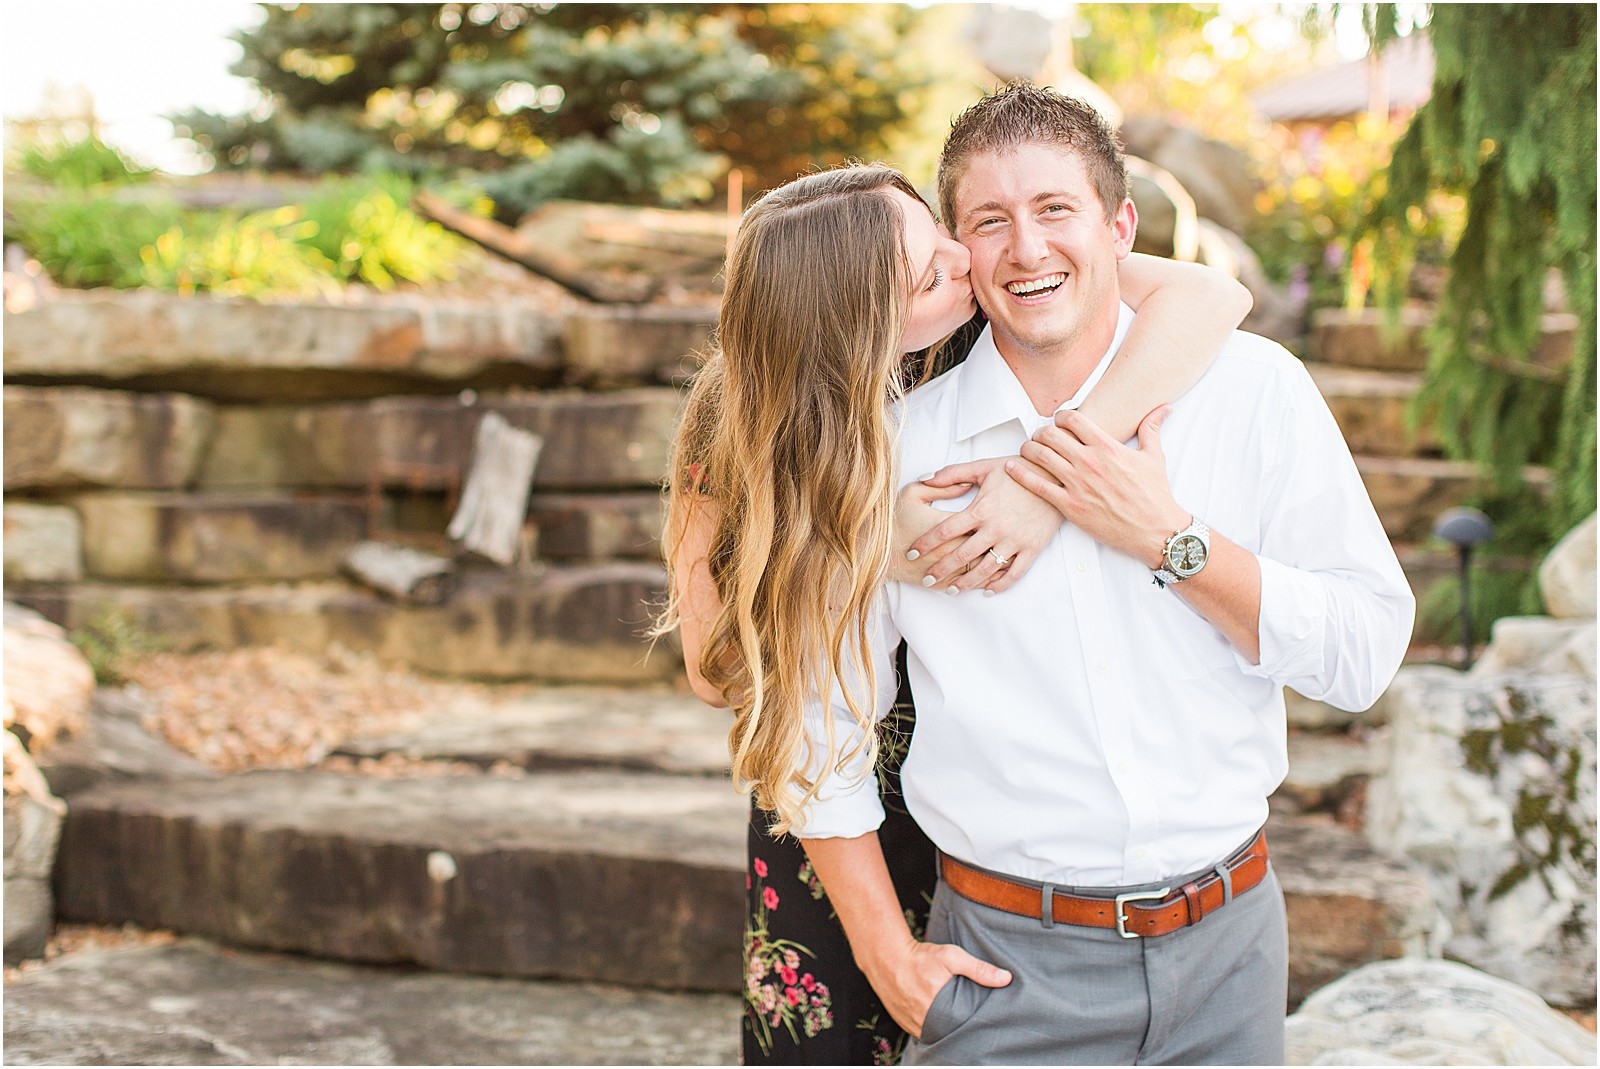 A Jasper Indiana Engagement Session | Tori and Kyle | Bret and Brandie Photography022.jpg